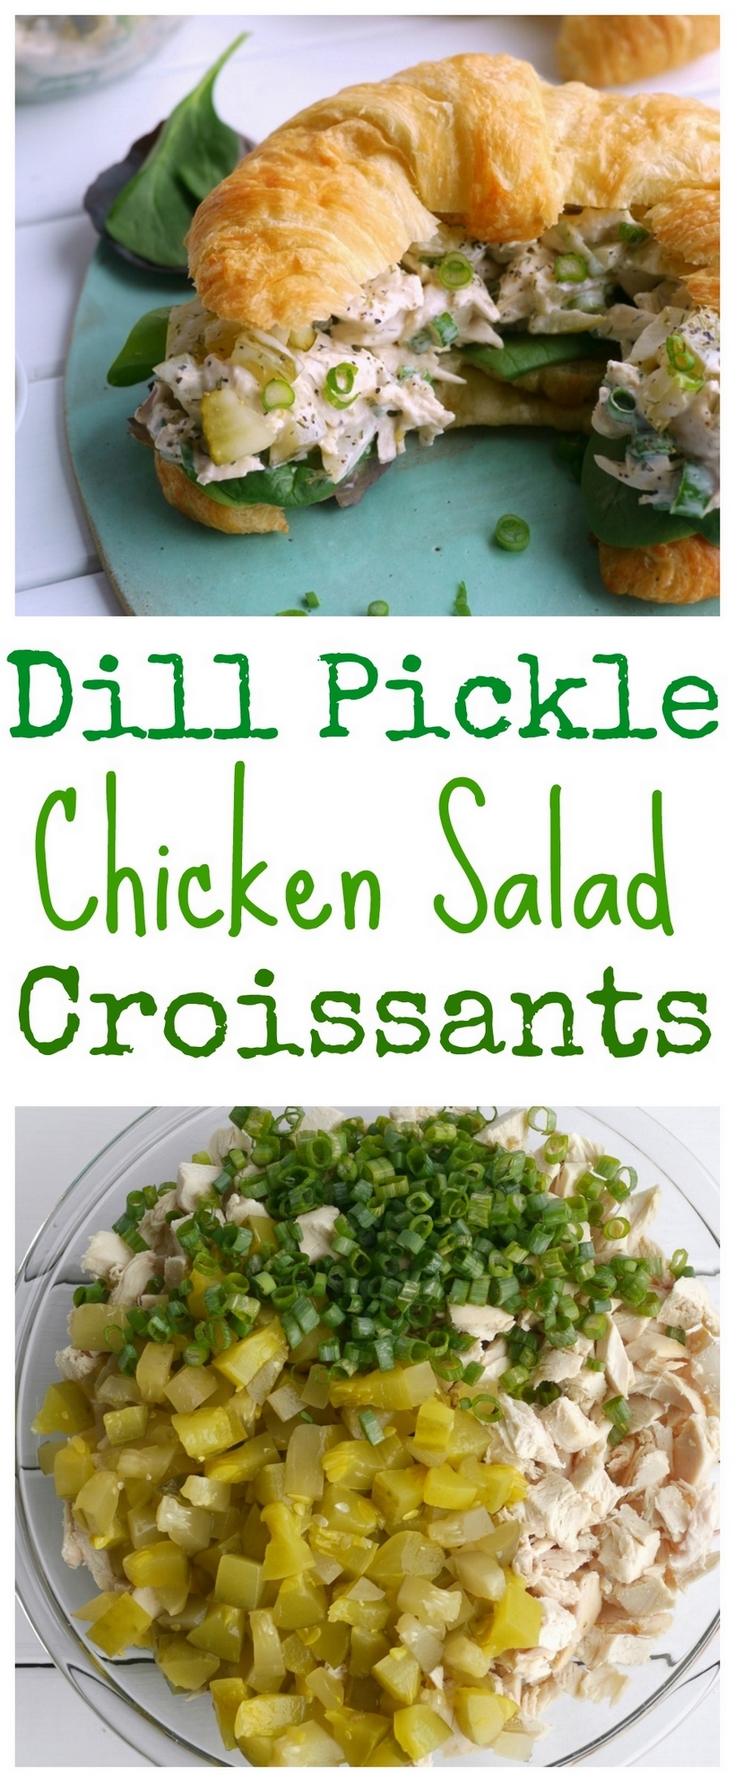 Since I am truly a dedicated pickle lover, these Dill Pickle Chicken Salad Croissants have become a fast favorite. It's perfect for lunch or a light dinner and keeps for several days in the fridge. I promise you are going to love the flavor, from NoblePig.com.

 via @cmpollak1